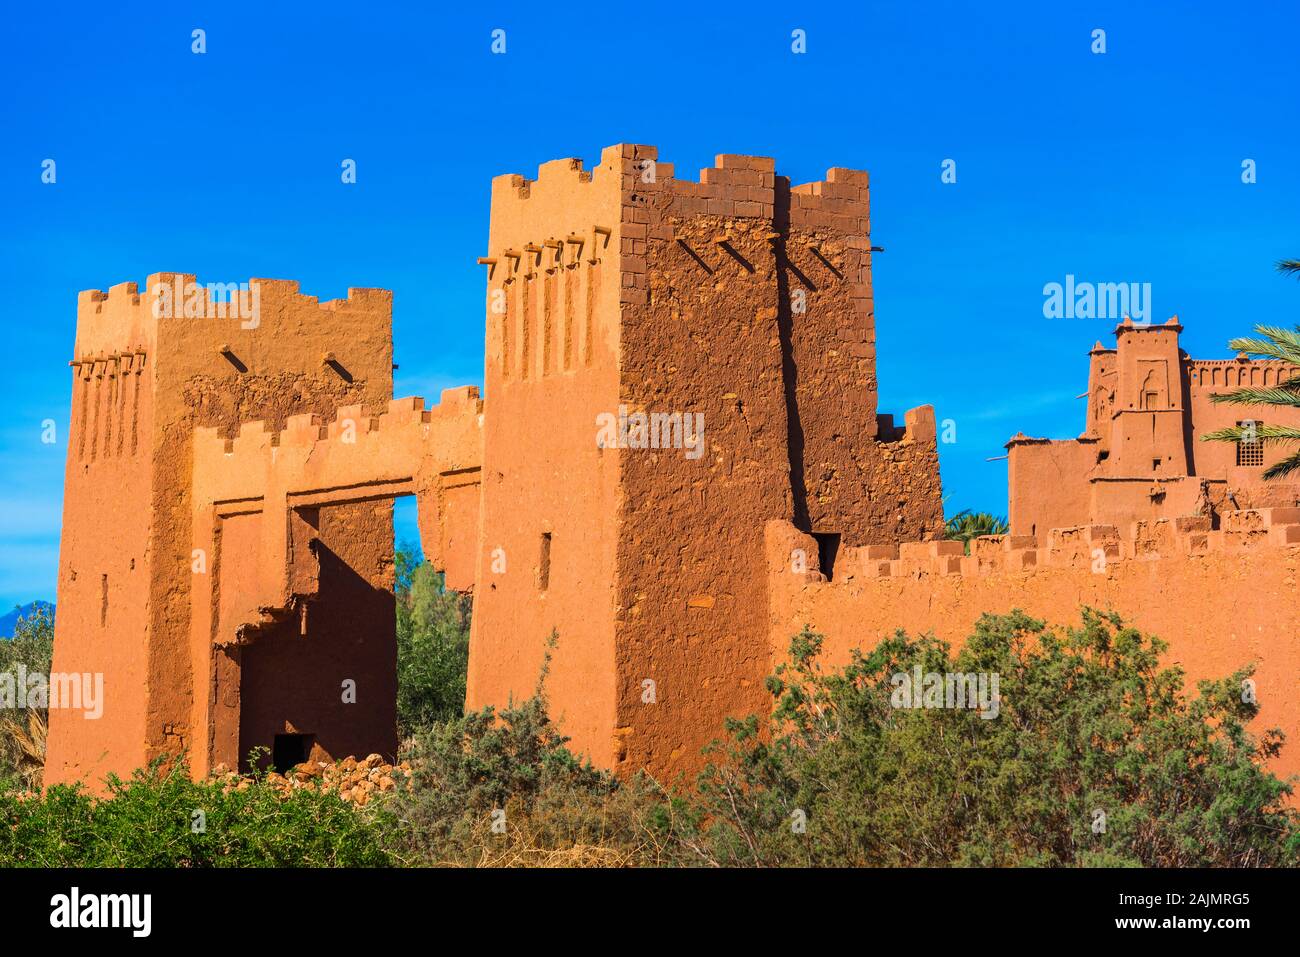 View of the fortified city of Ait-Ben-Haddou, Morocco Stock Photo